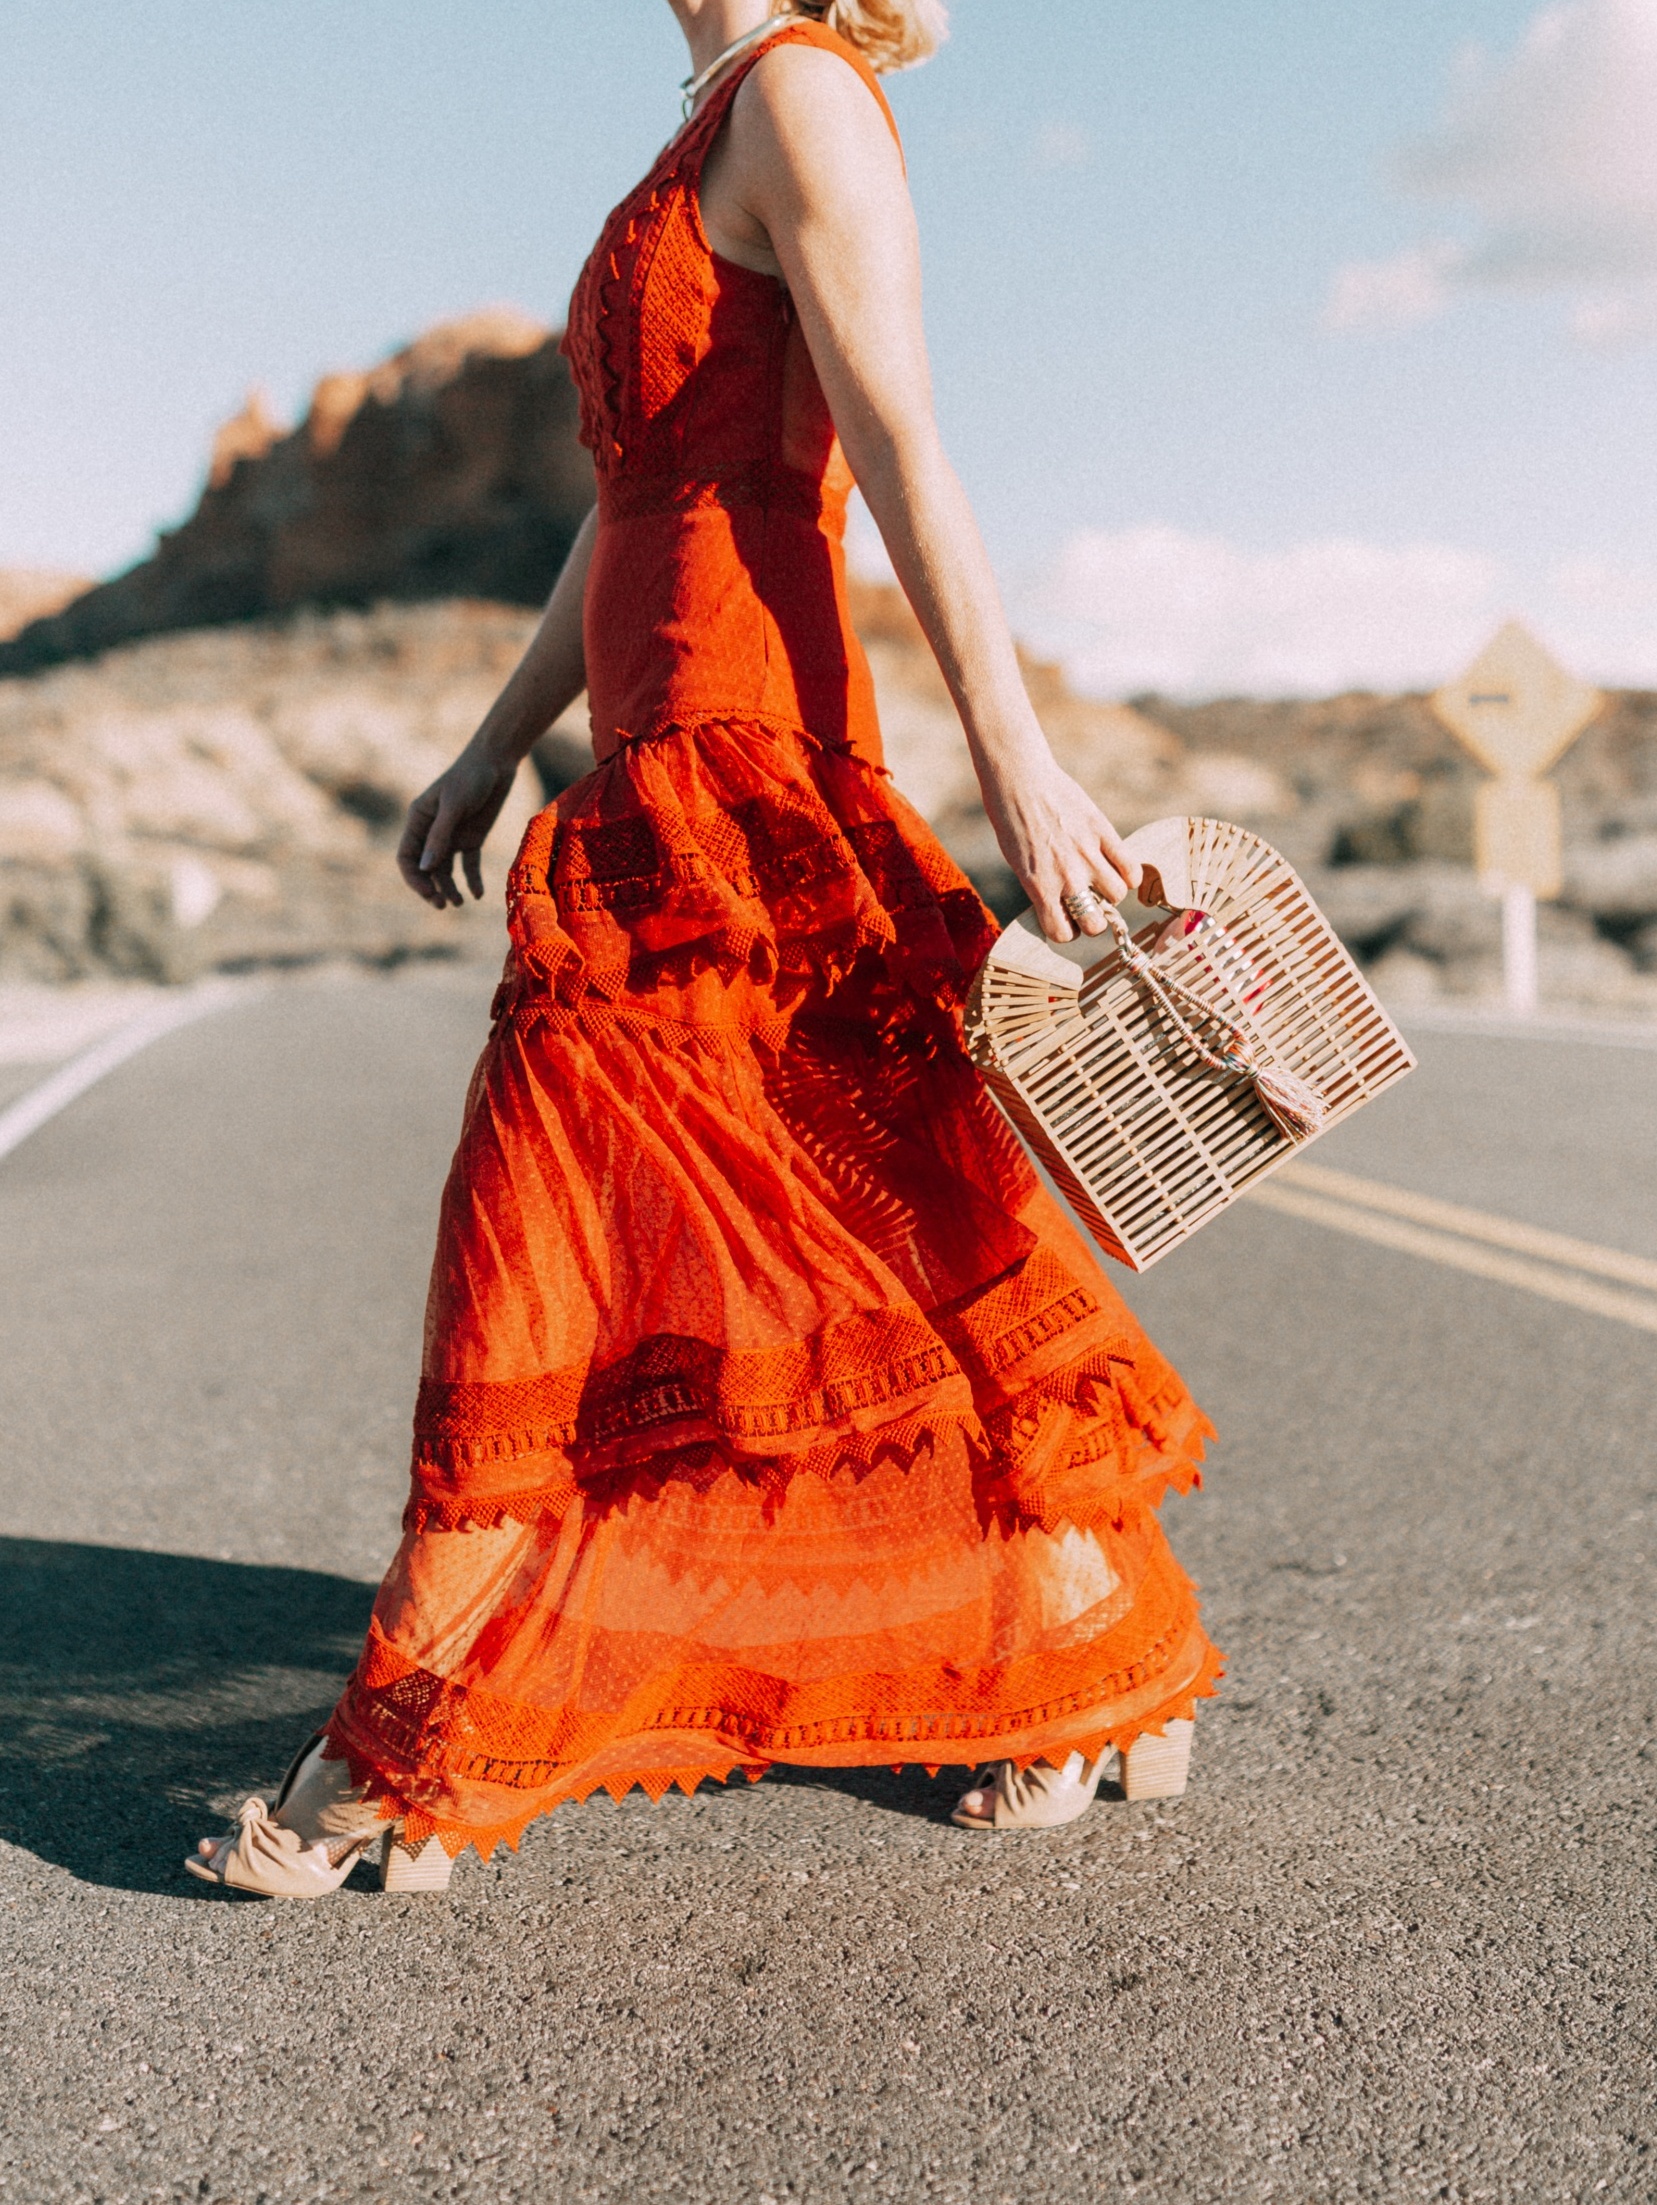 Spring Handbags, Fashion blogger Erin Busbee of BusbeeStyle.com wearing an ornage House of Harlow dress from Revolve with Vince Camuto bamboo basket bag, and Vince Camuto nude sandals in Moab, Utah